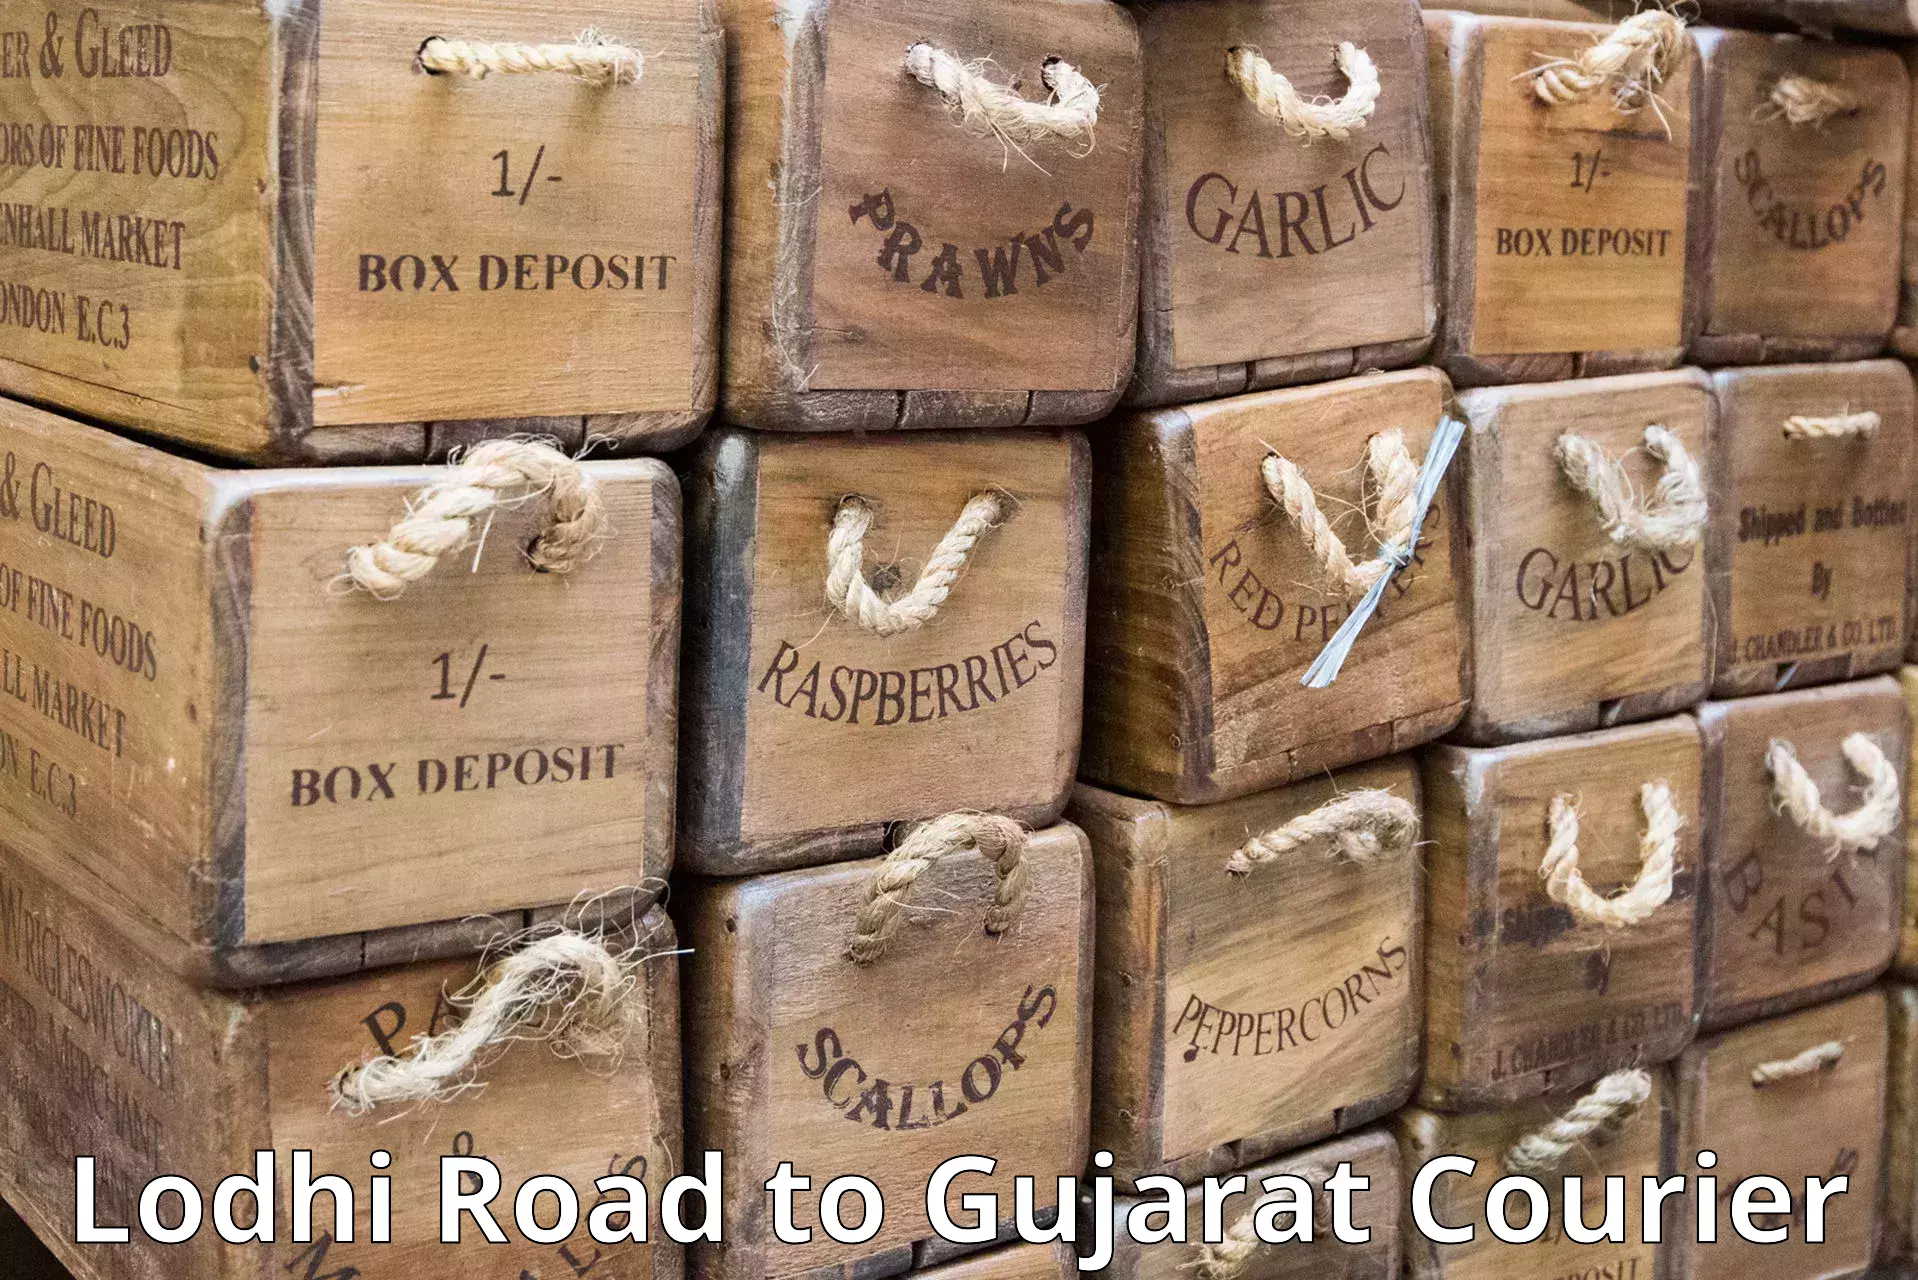 Comprehensive delivery network Lodhi Road to Gujarat